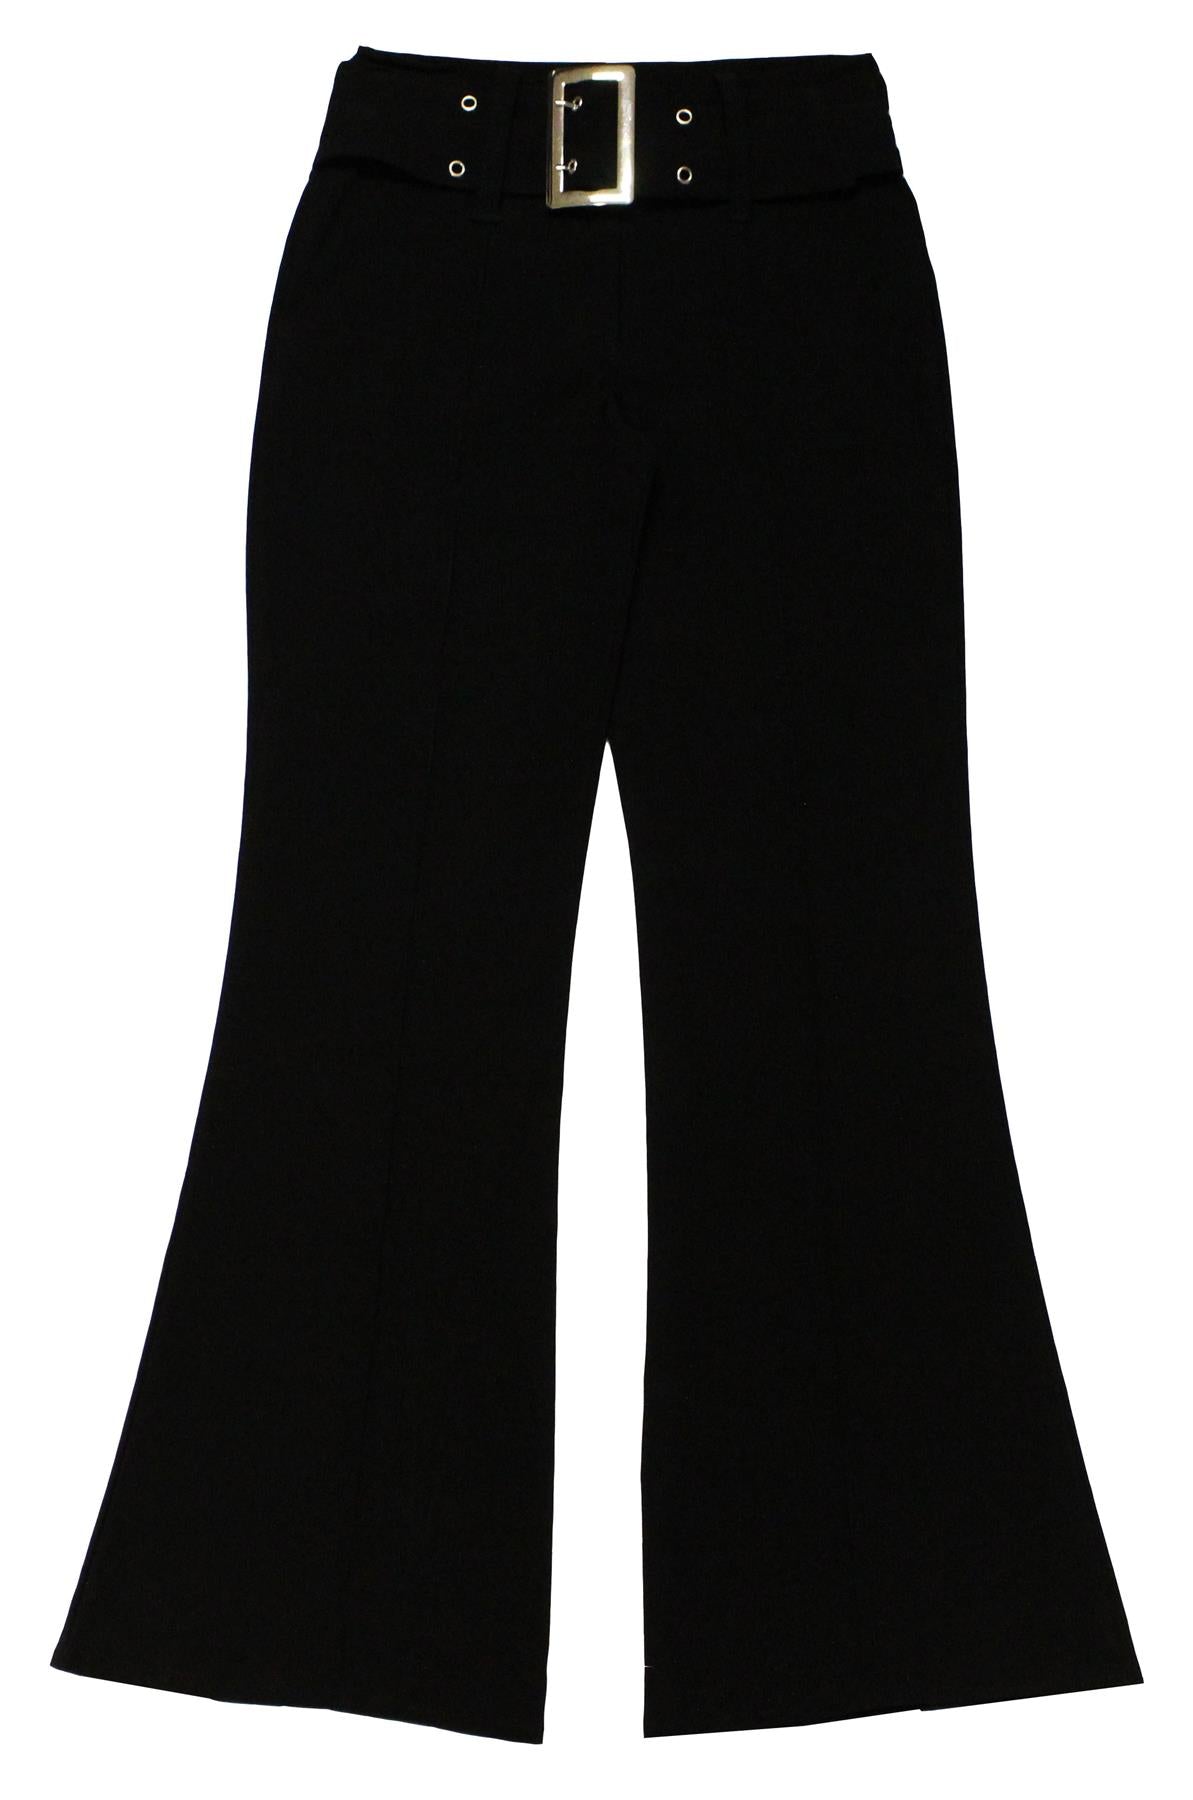 GIRLS FASHIONABLE TROUSERS WITH BELT Girls Trousers